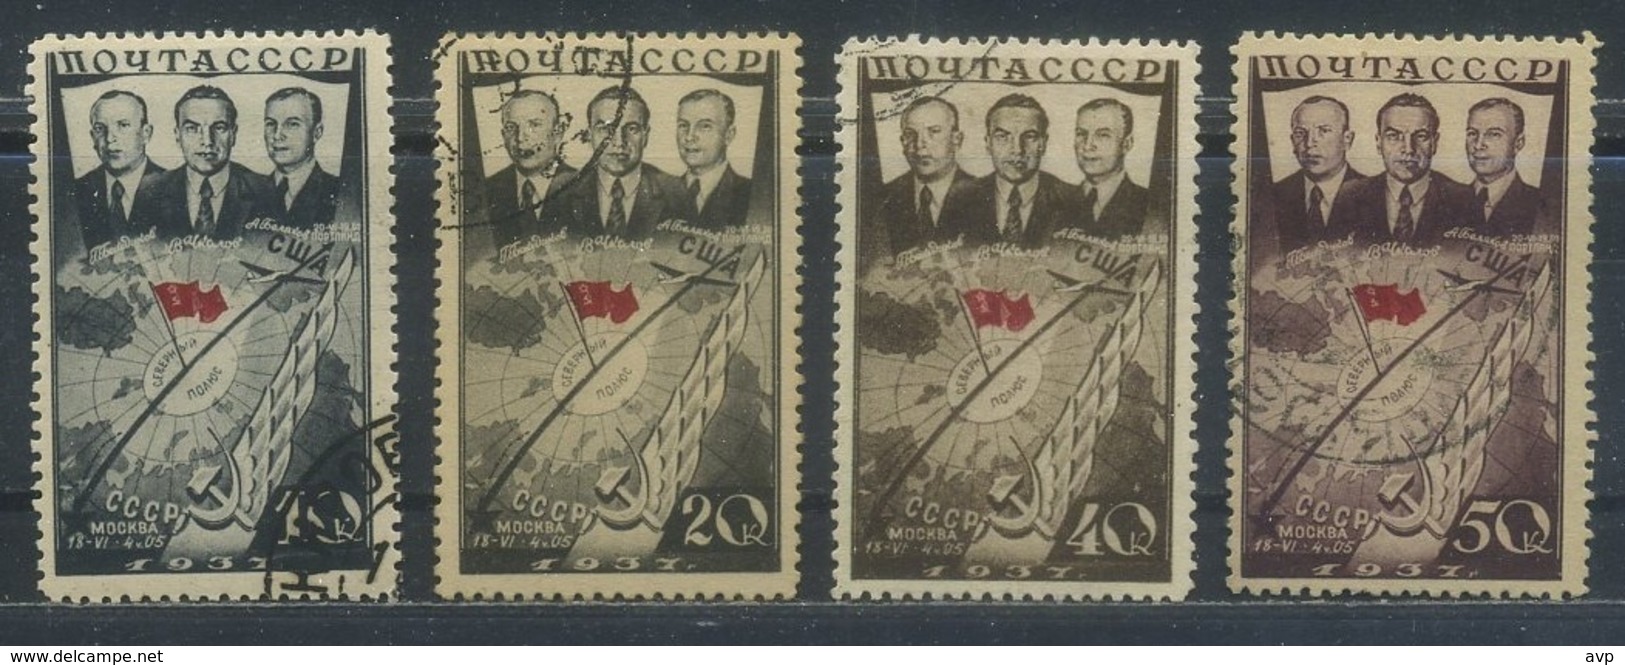 USSR 1938 Michel 595-598 First Flight Moscow-Portland Over North Pole. Used - Usati